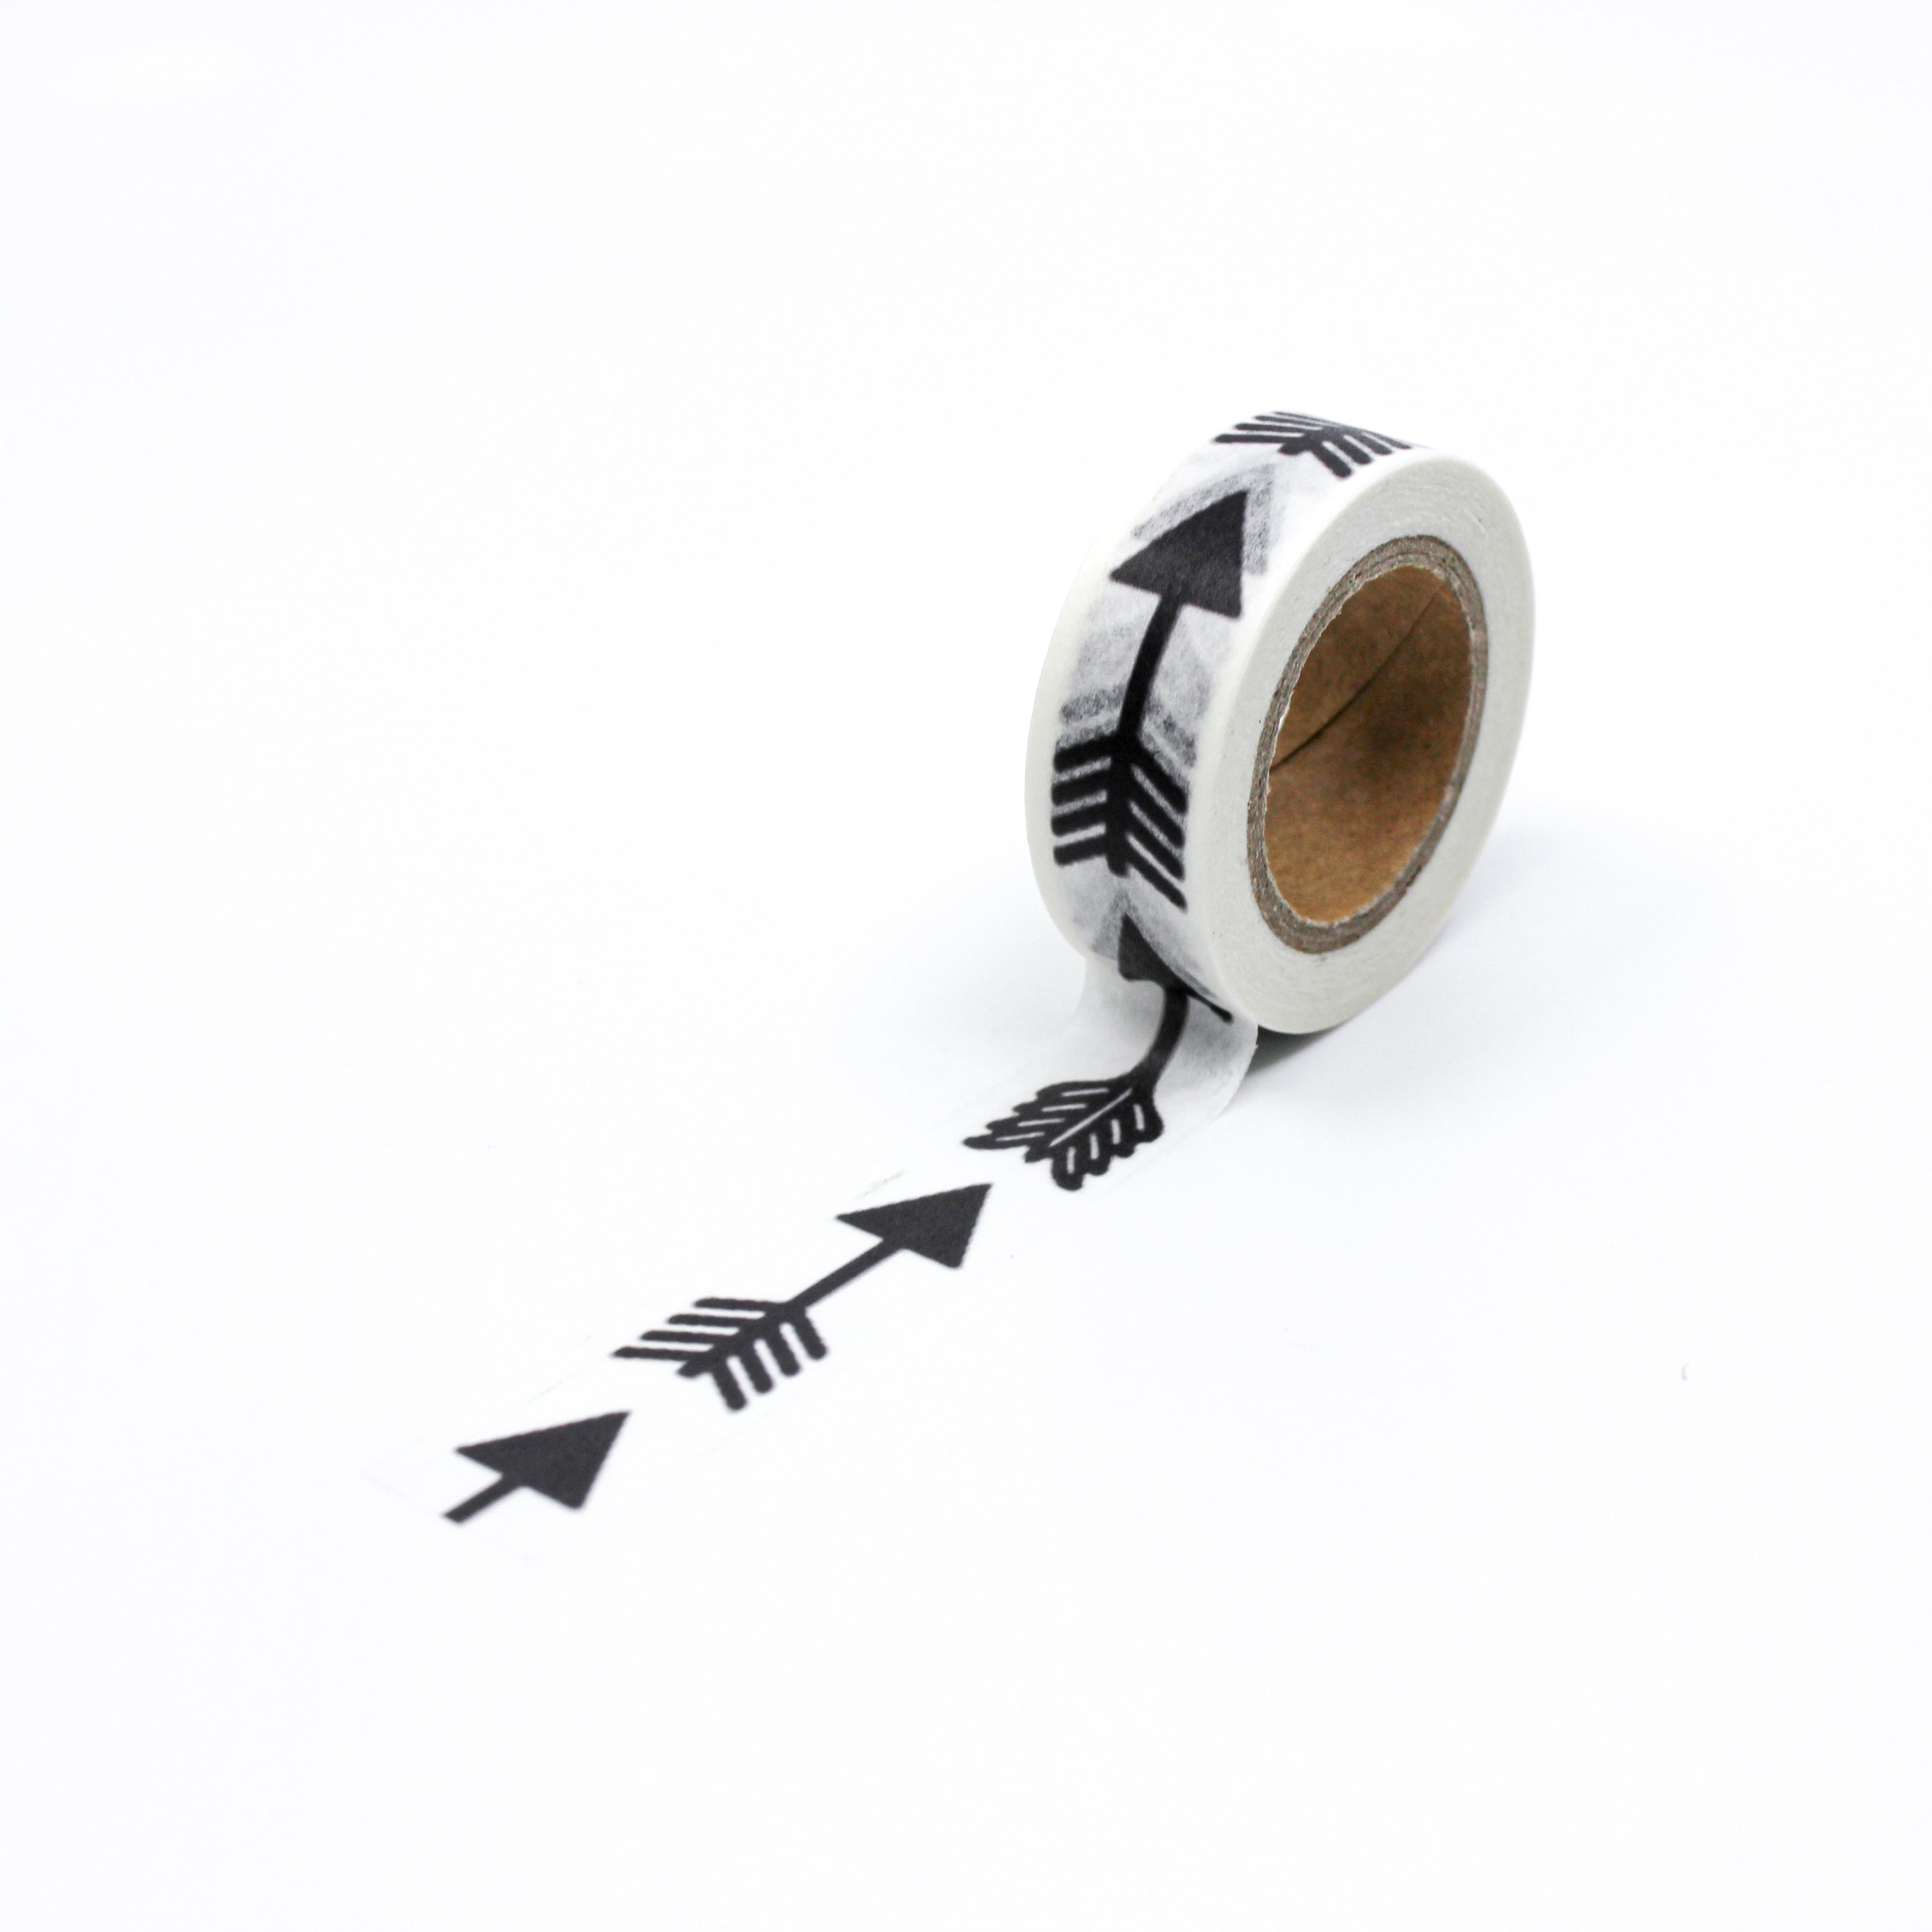 This is a full pattern repeat view of black fletching arrows washi tape from BBB Supplies Craft Shop